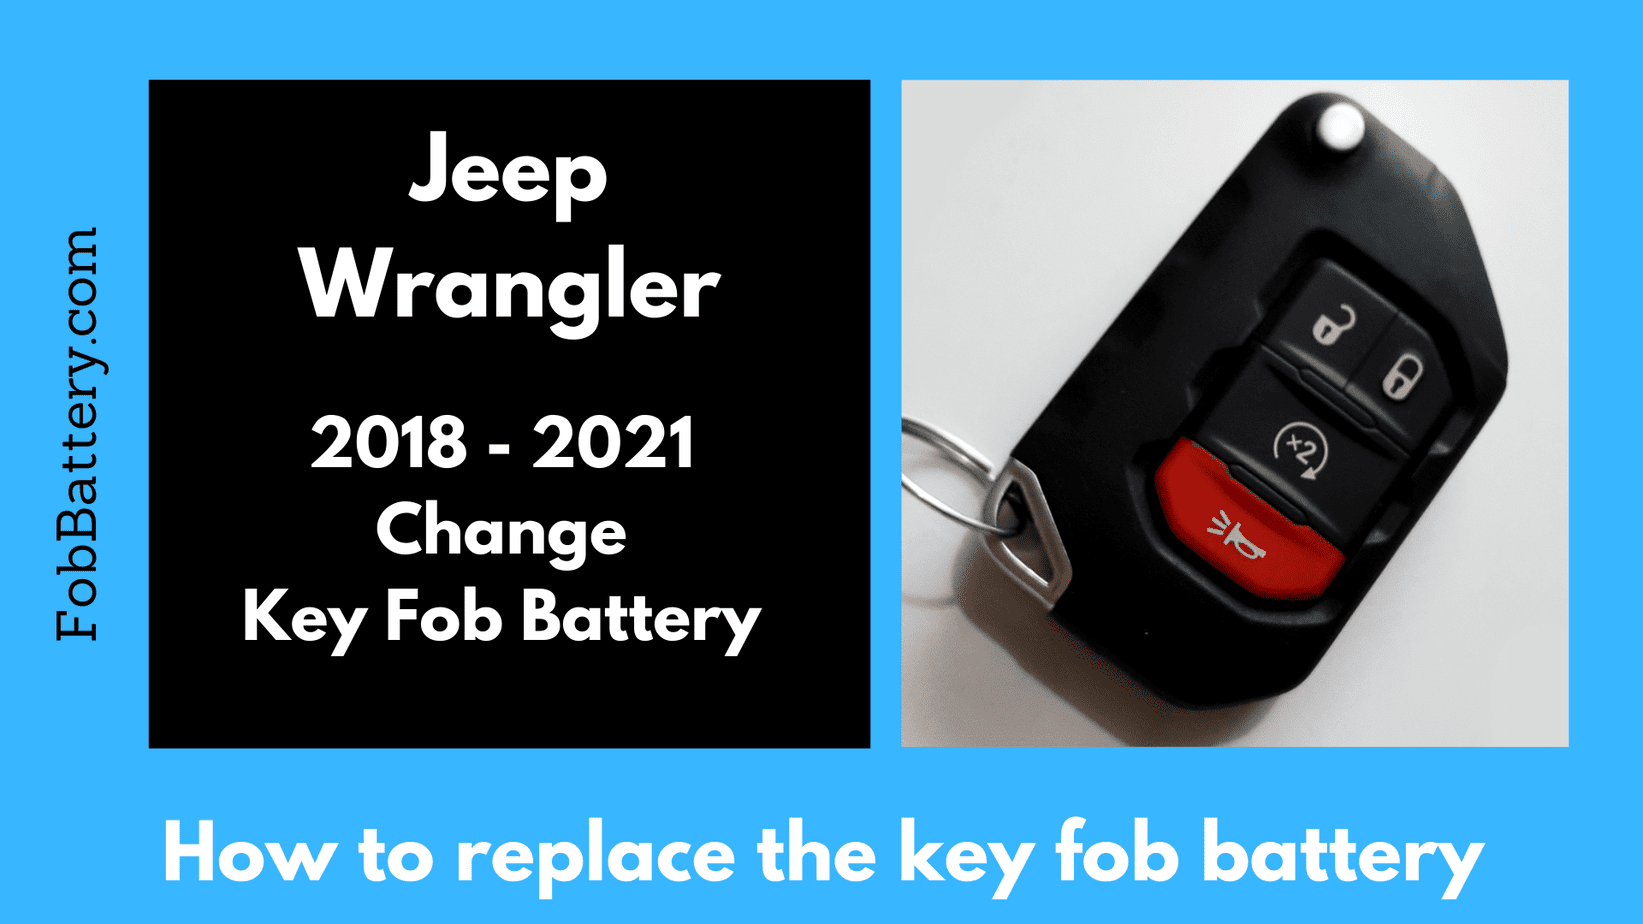 Jeep Wrangler key fob battery replacement 